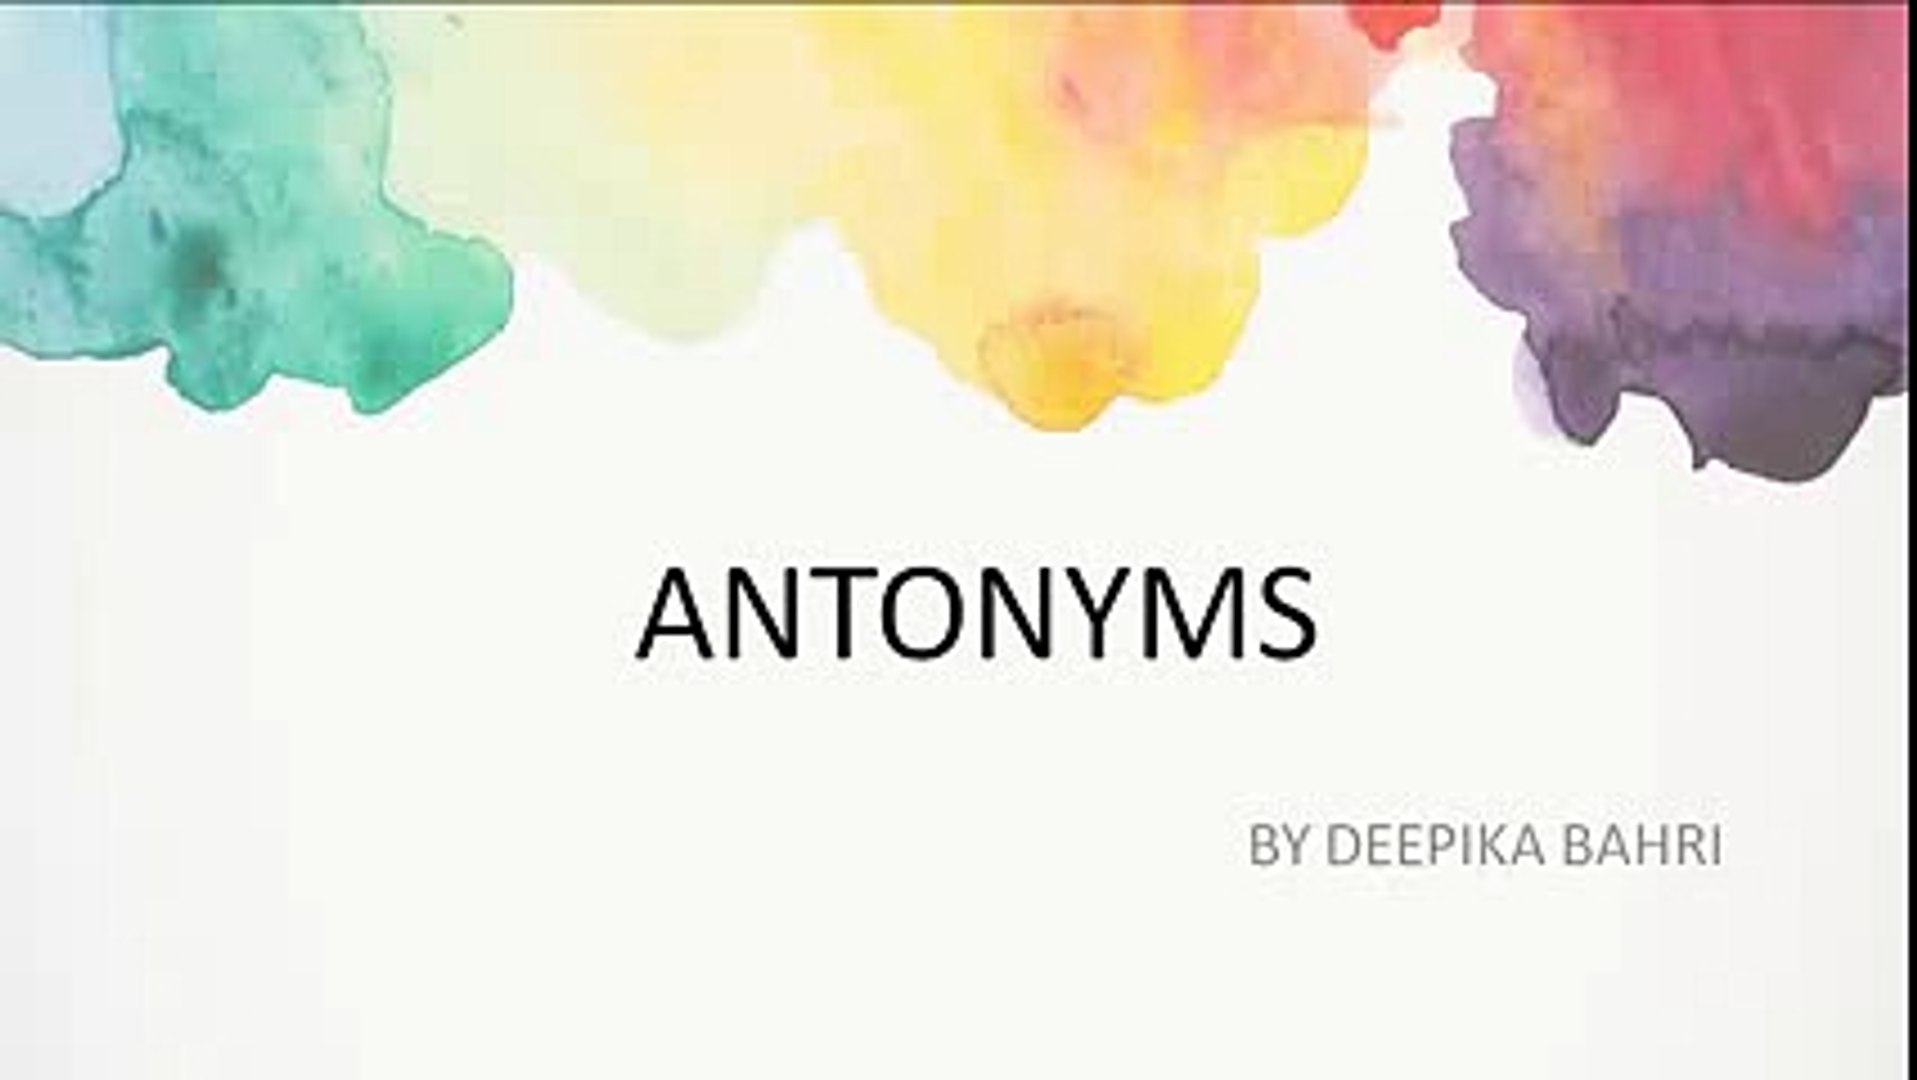 Antonyms - Definition, meaning , Examples  - Learn English Grammar